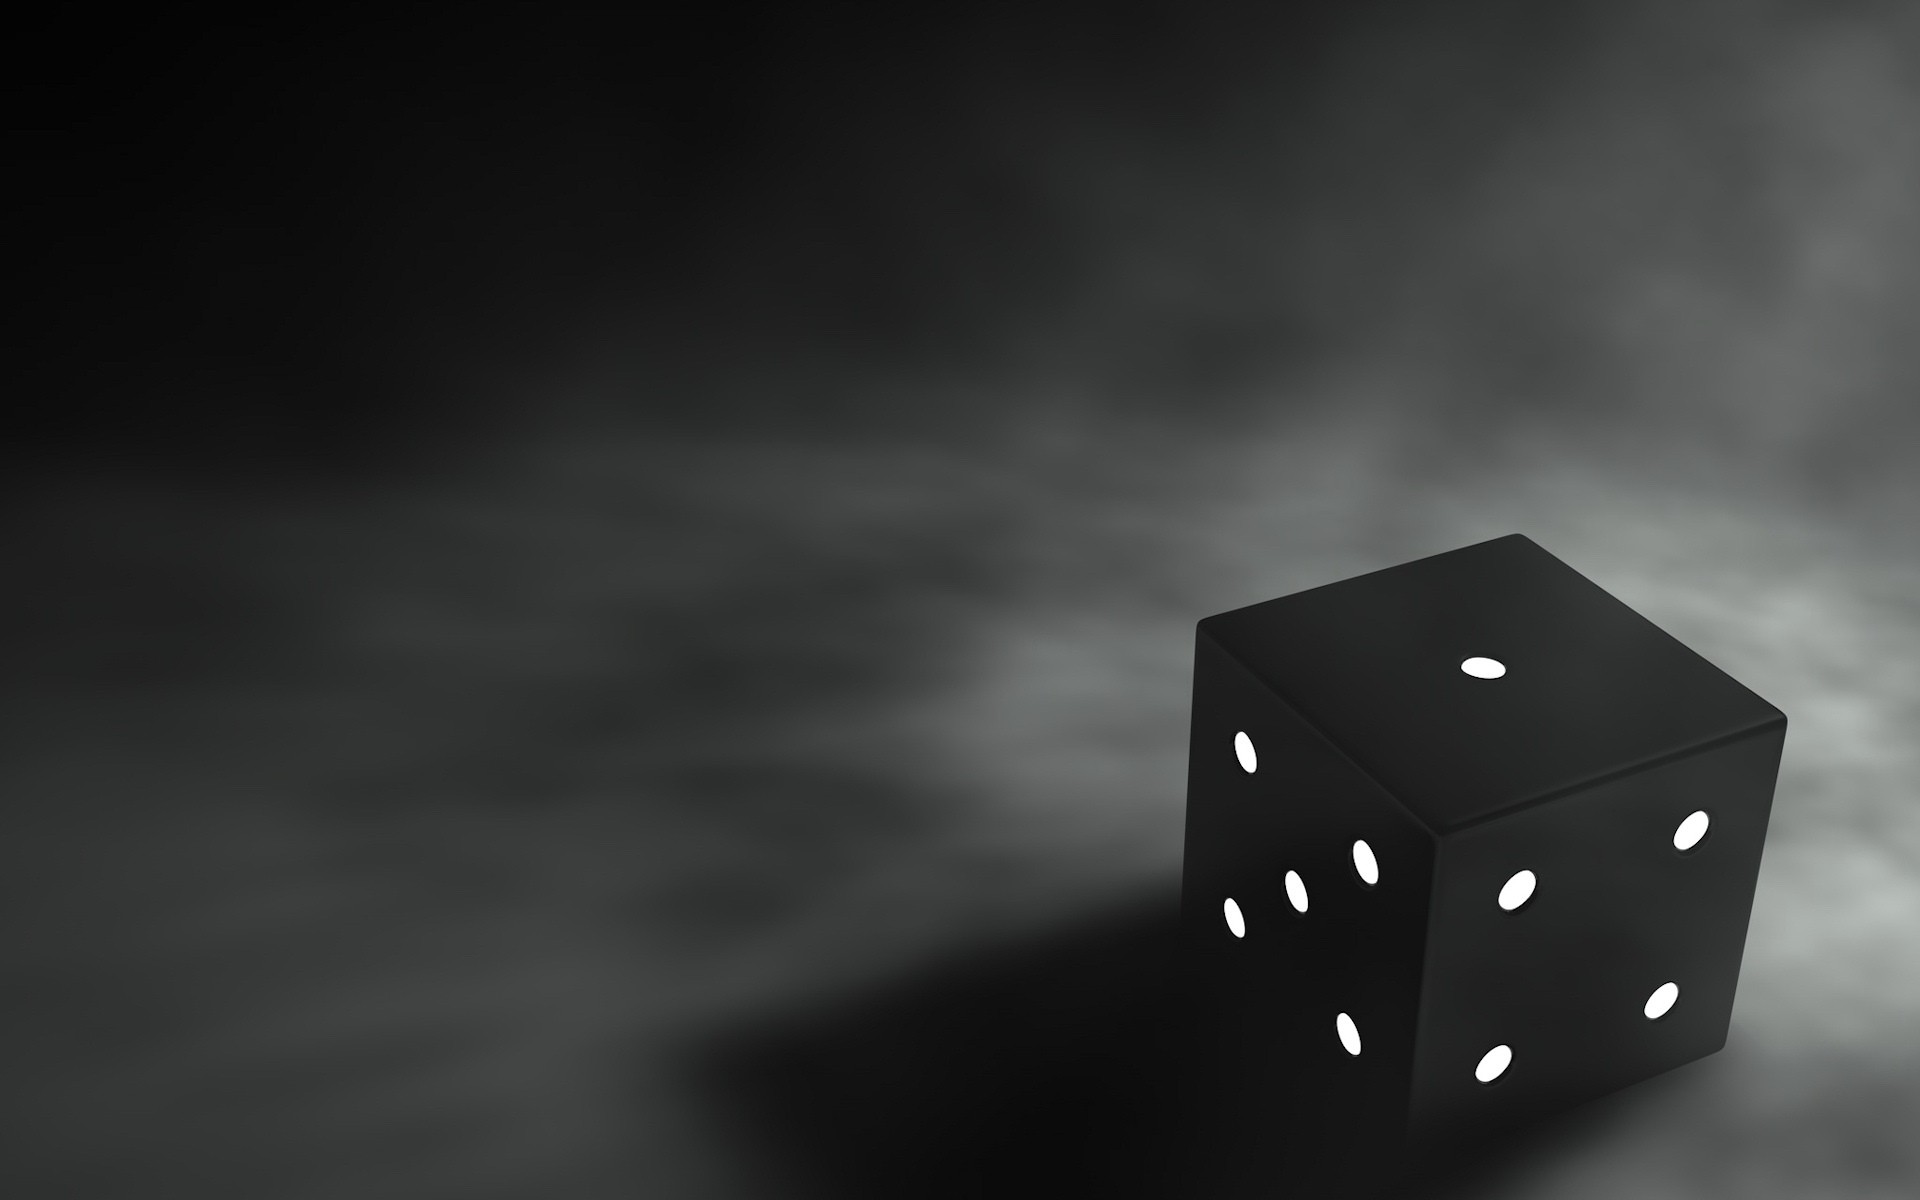 dark wallpapers hd,games,black,indoor games and sports,white,dice